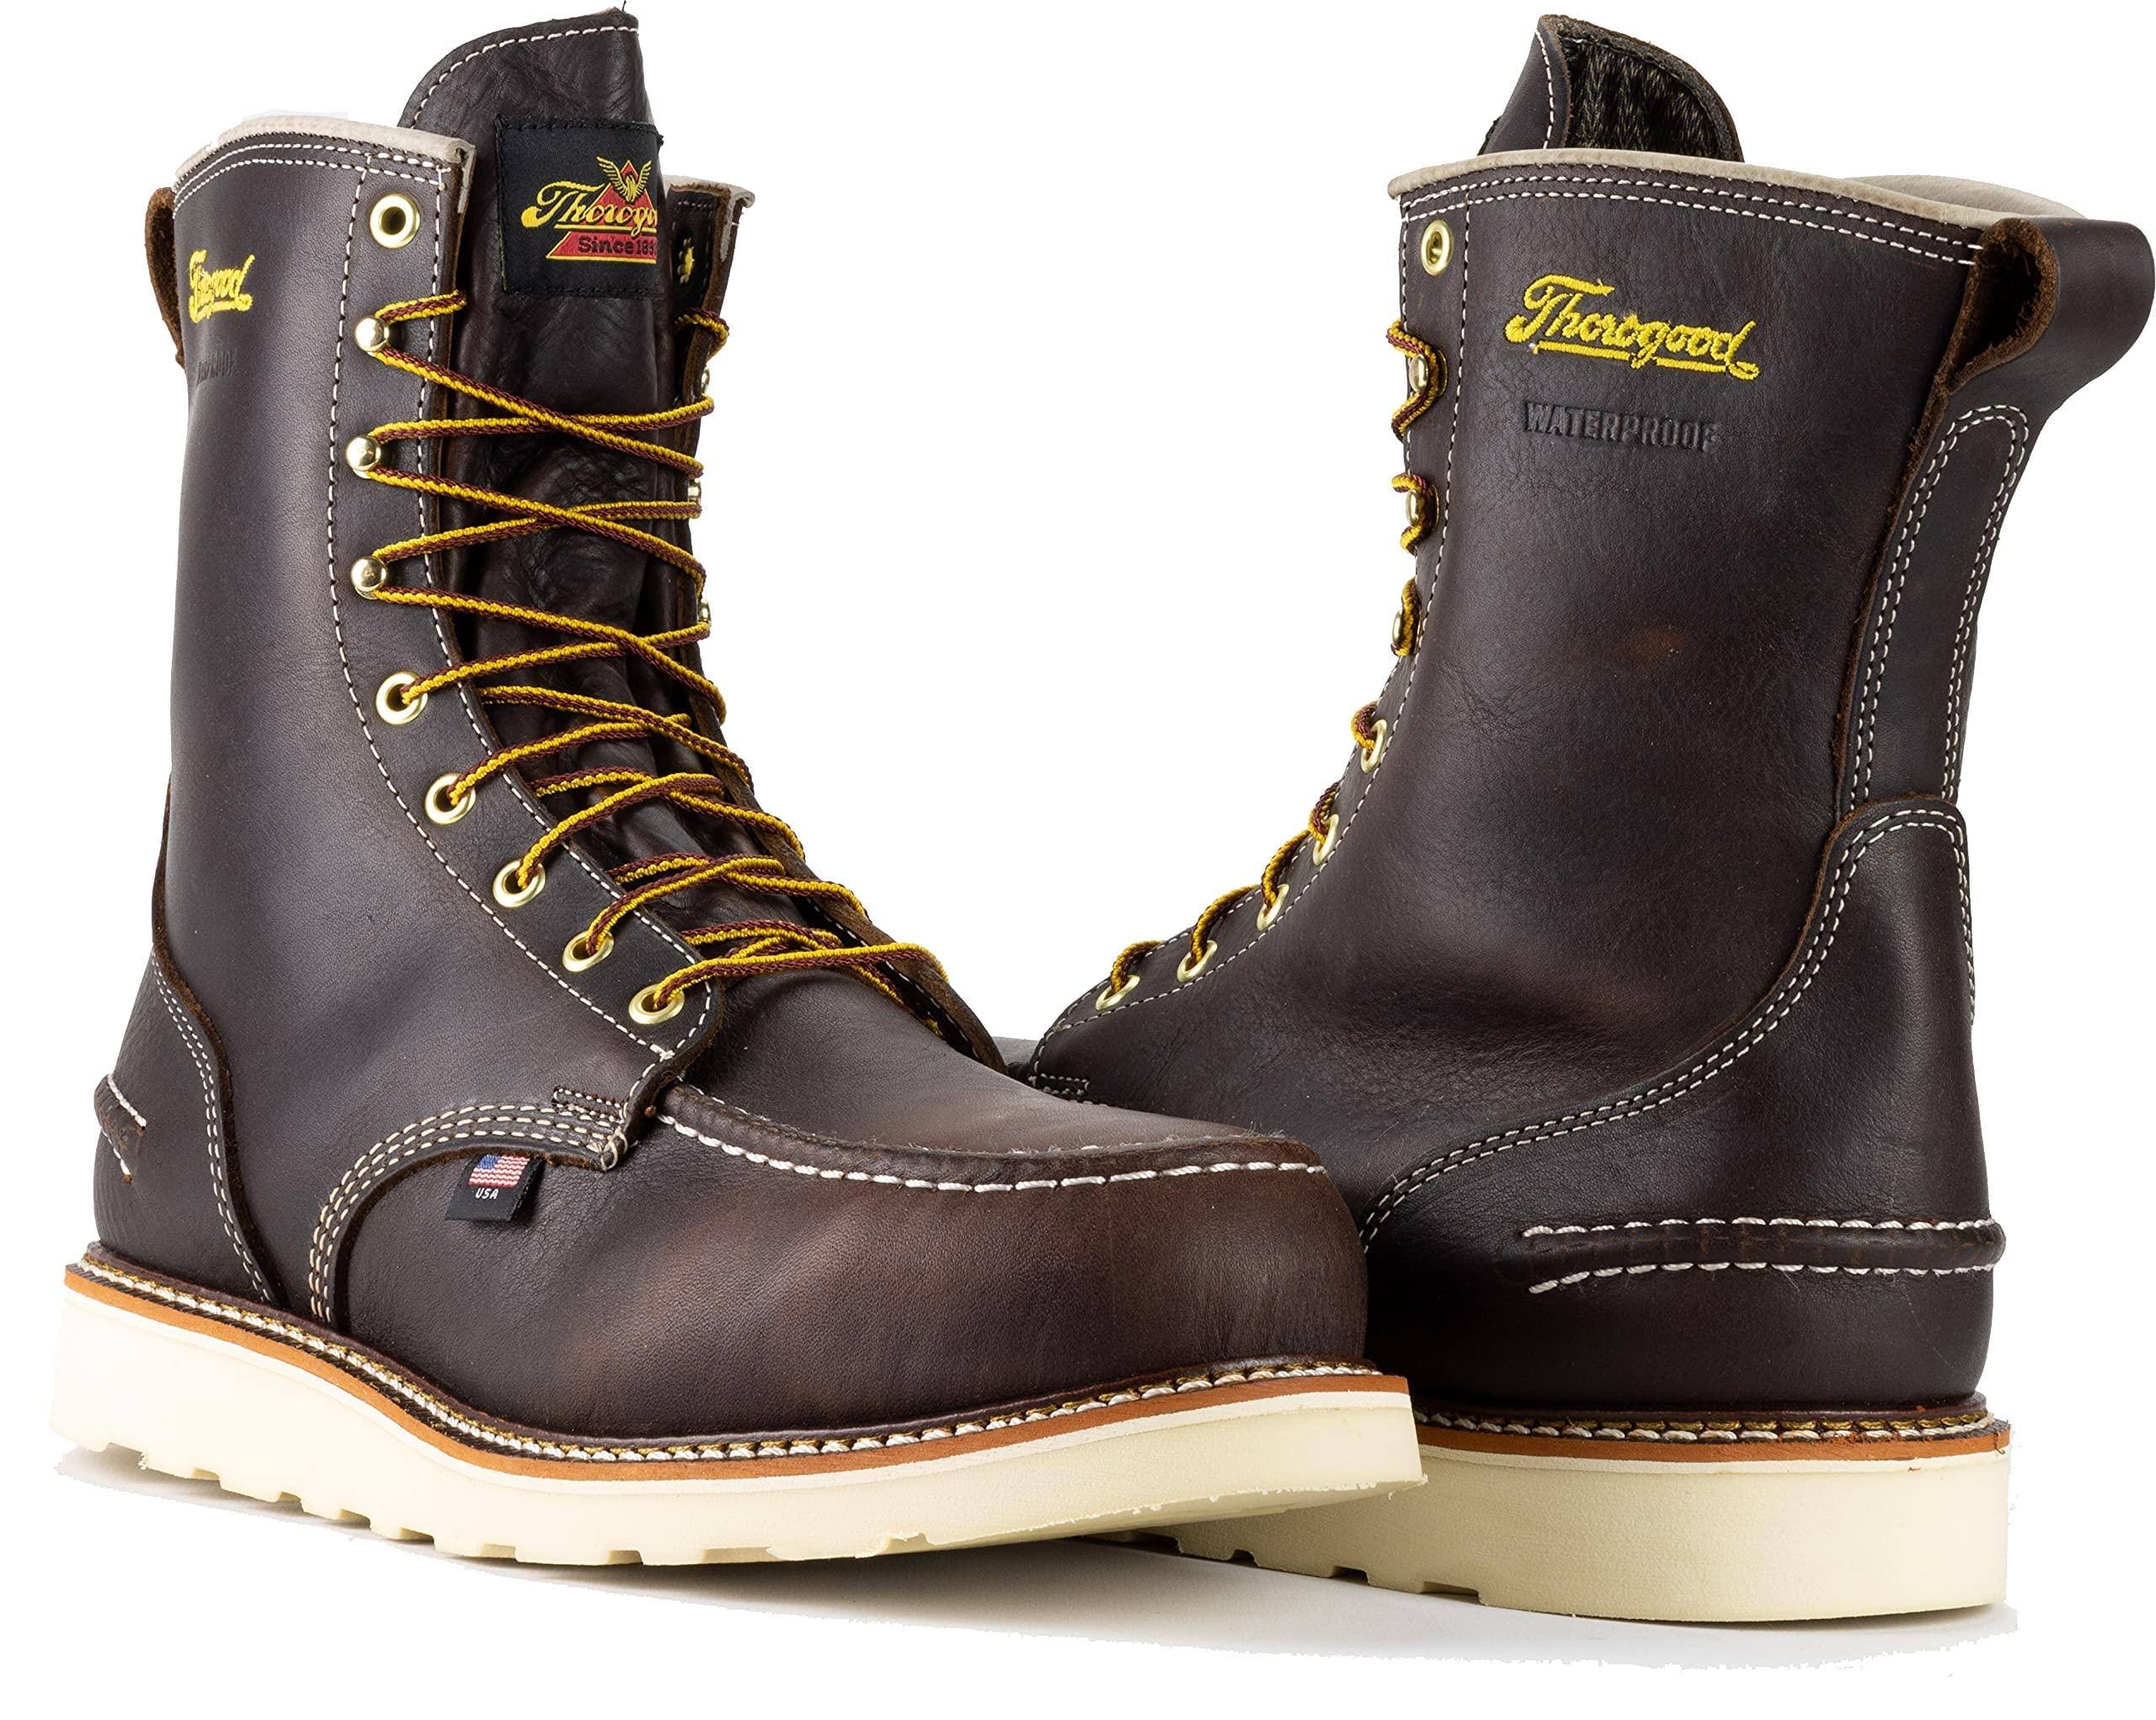 Thorogood 1957 Series 8” Waterproof Steel Toe Work Boots for Men - Full-Grain Leather with Moc Toe, Slip-Resistant Wedge Outsole, and Shock-Absorbing Insole; EH Rated